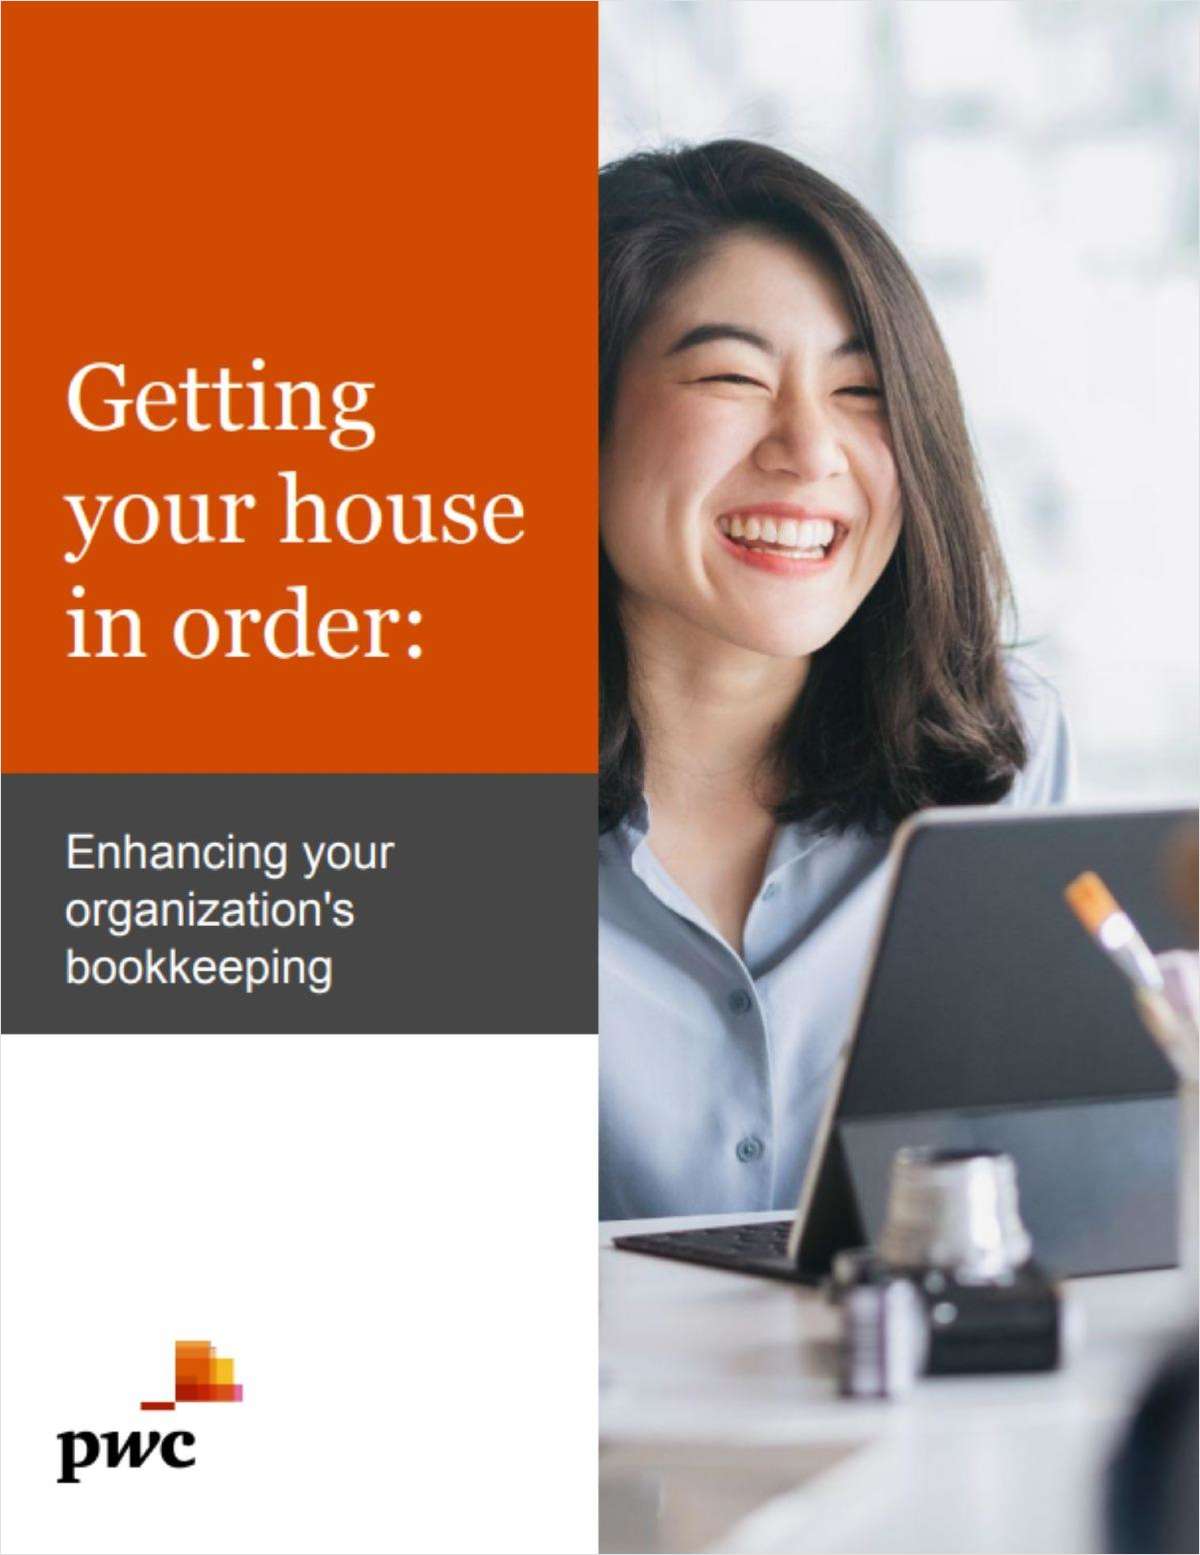 Getting your house in order: Enhancing your organization's bookkeeping